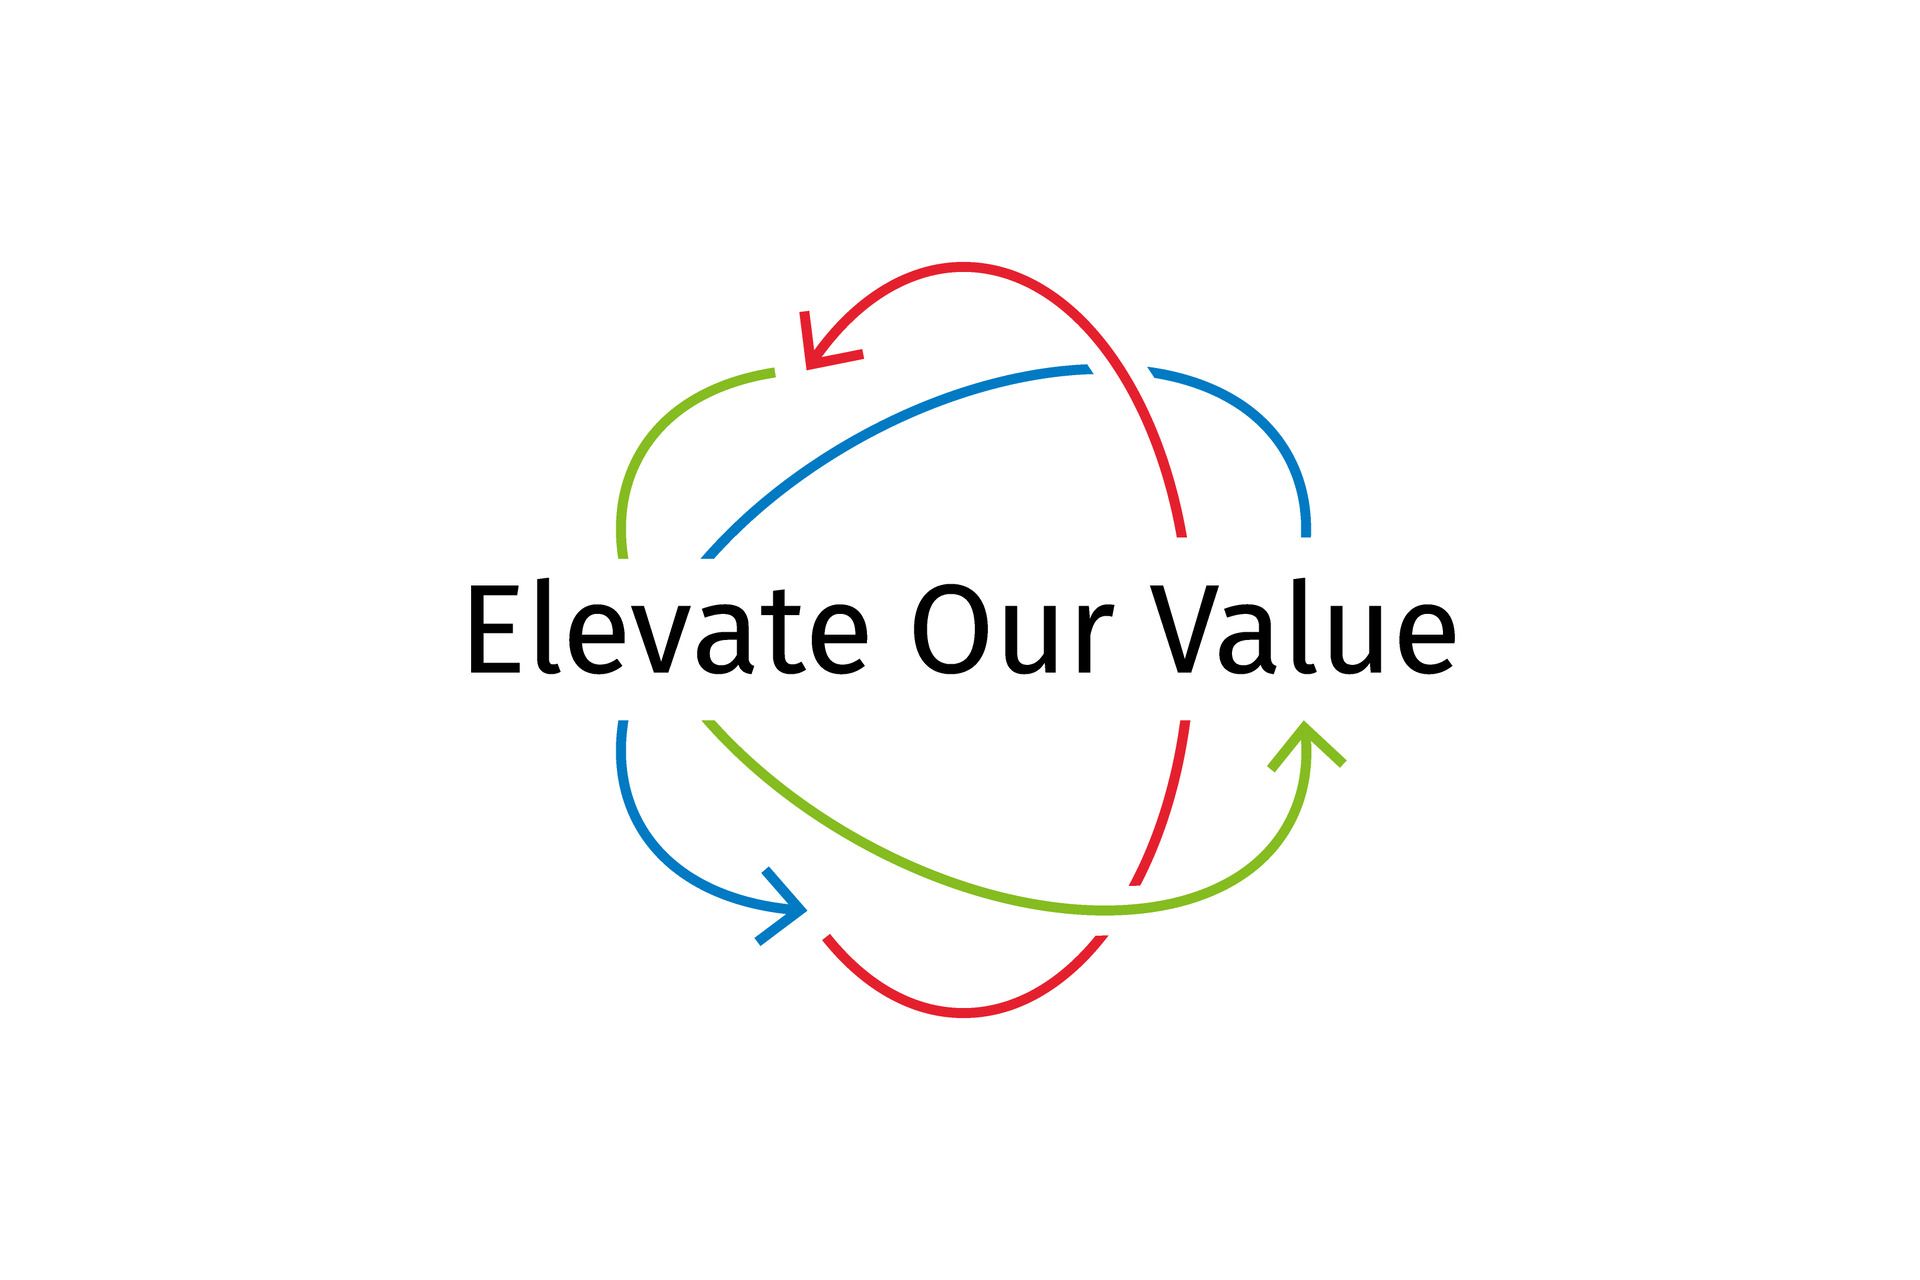 Strategy - Elevate Our Value